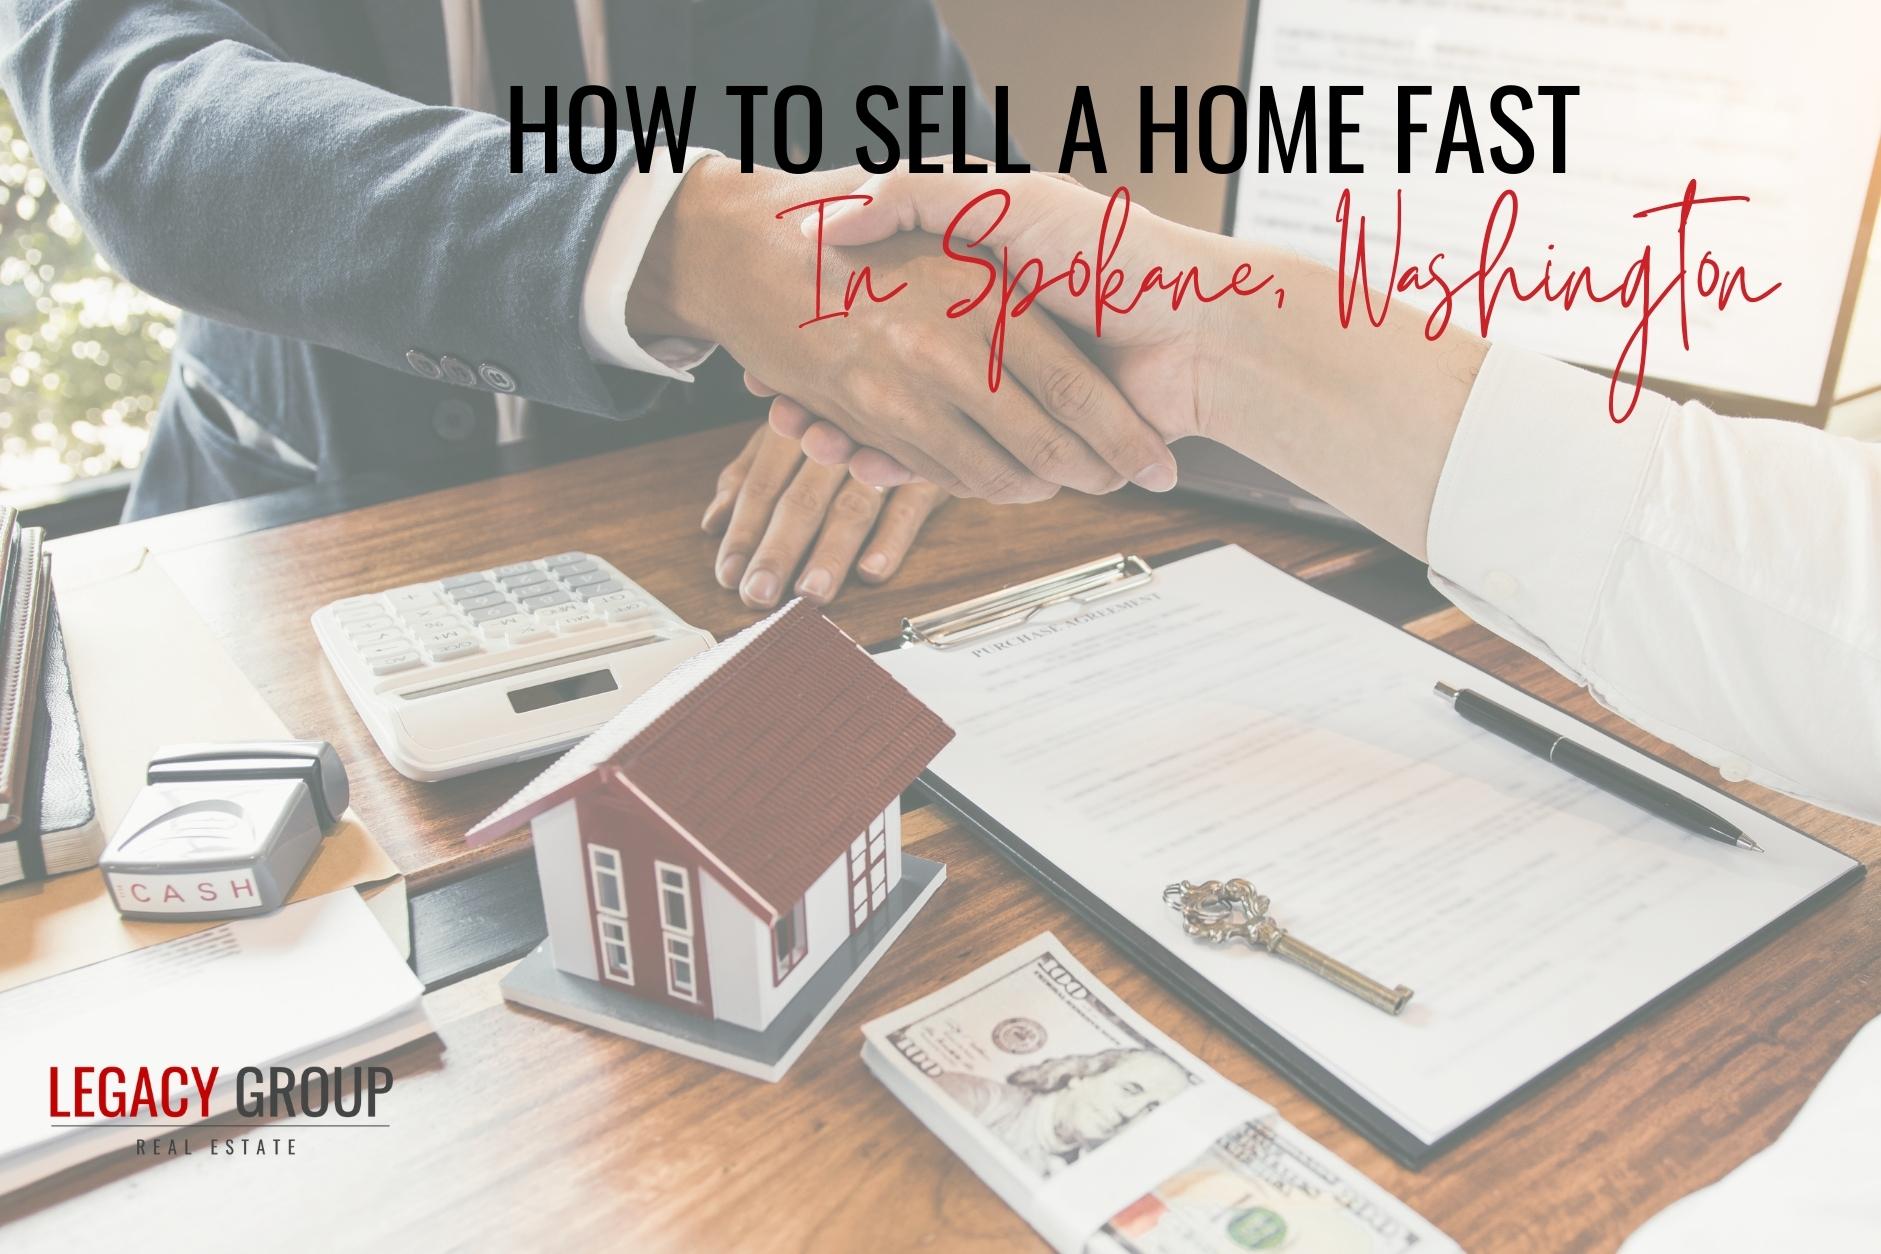 how to sell a home fast in spokane